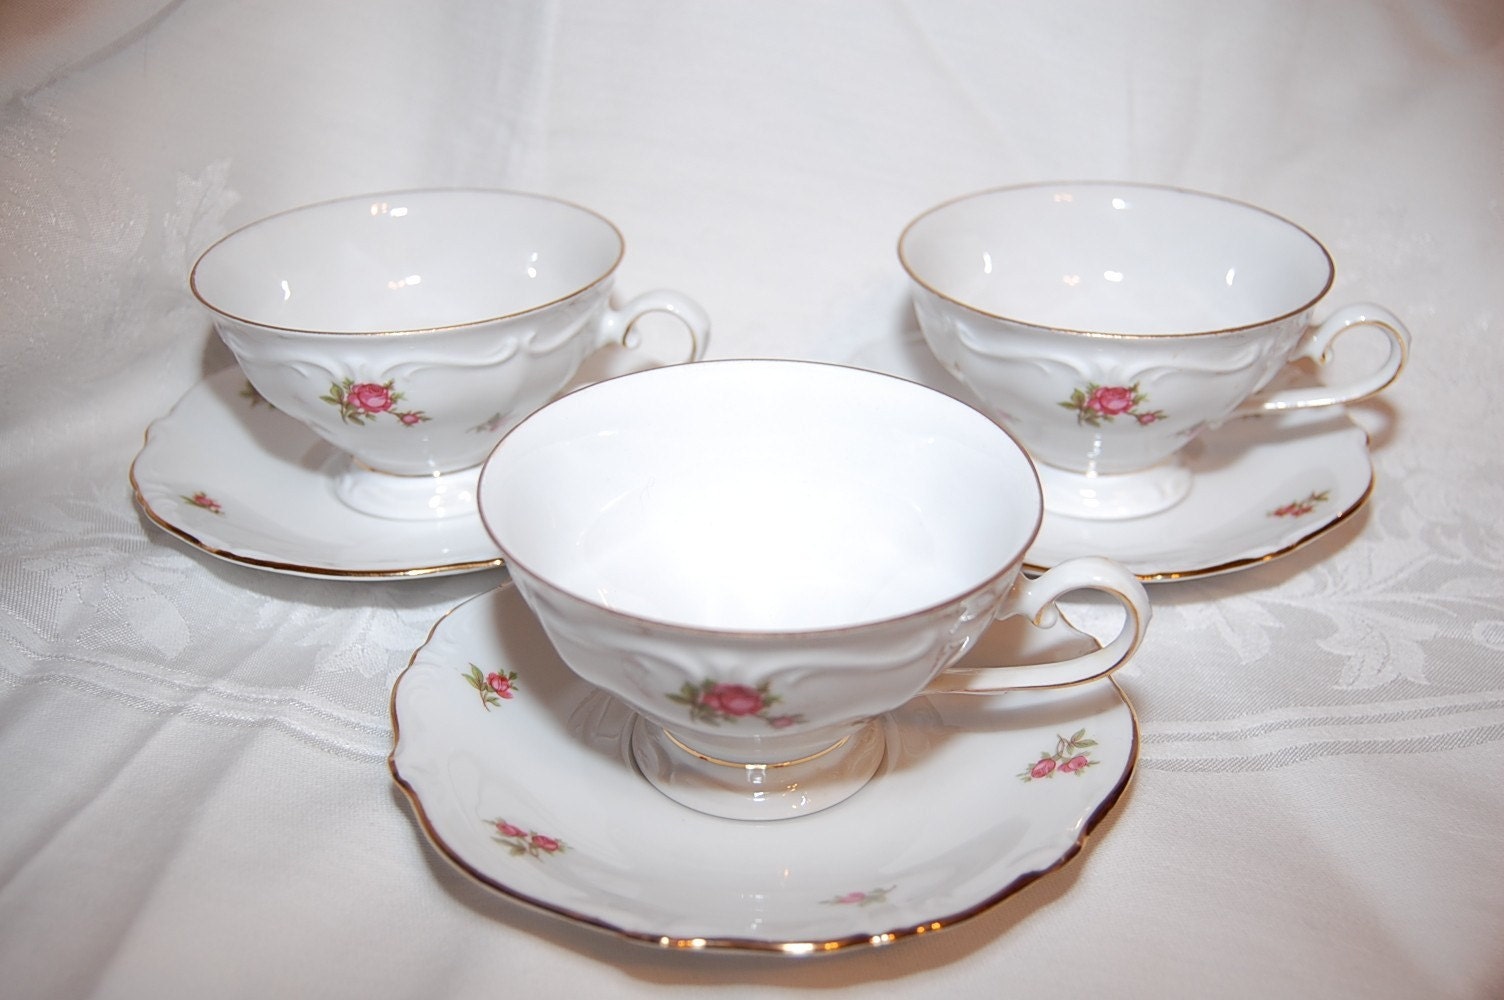 Tea   Bavarian Rose  tea  Pieces vintage and saucers  style Vintage Elegant Cups of and 6  cups Saucers Lot